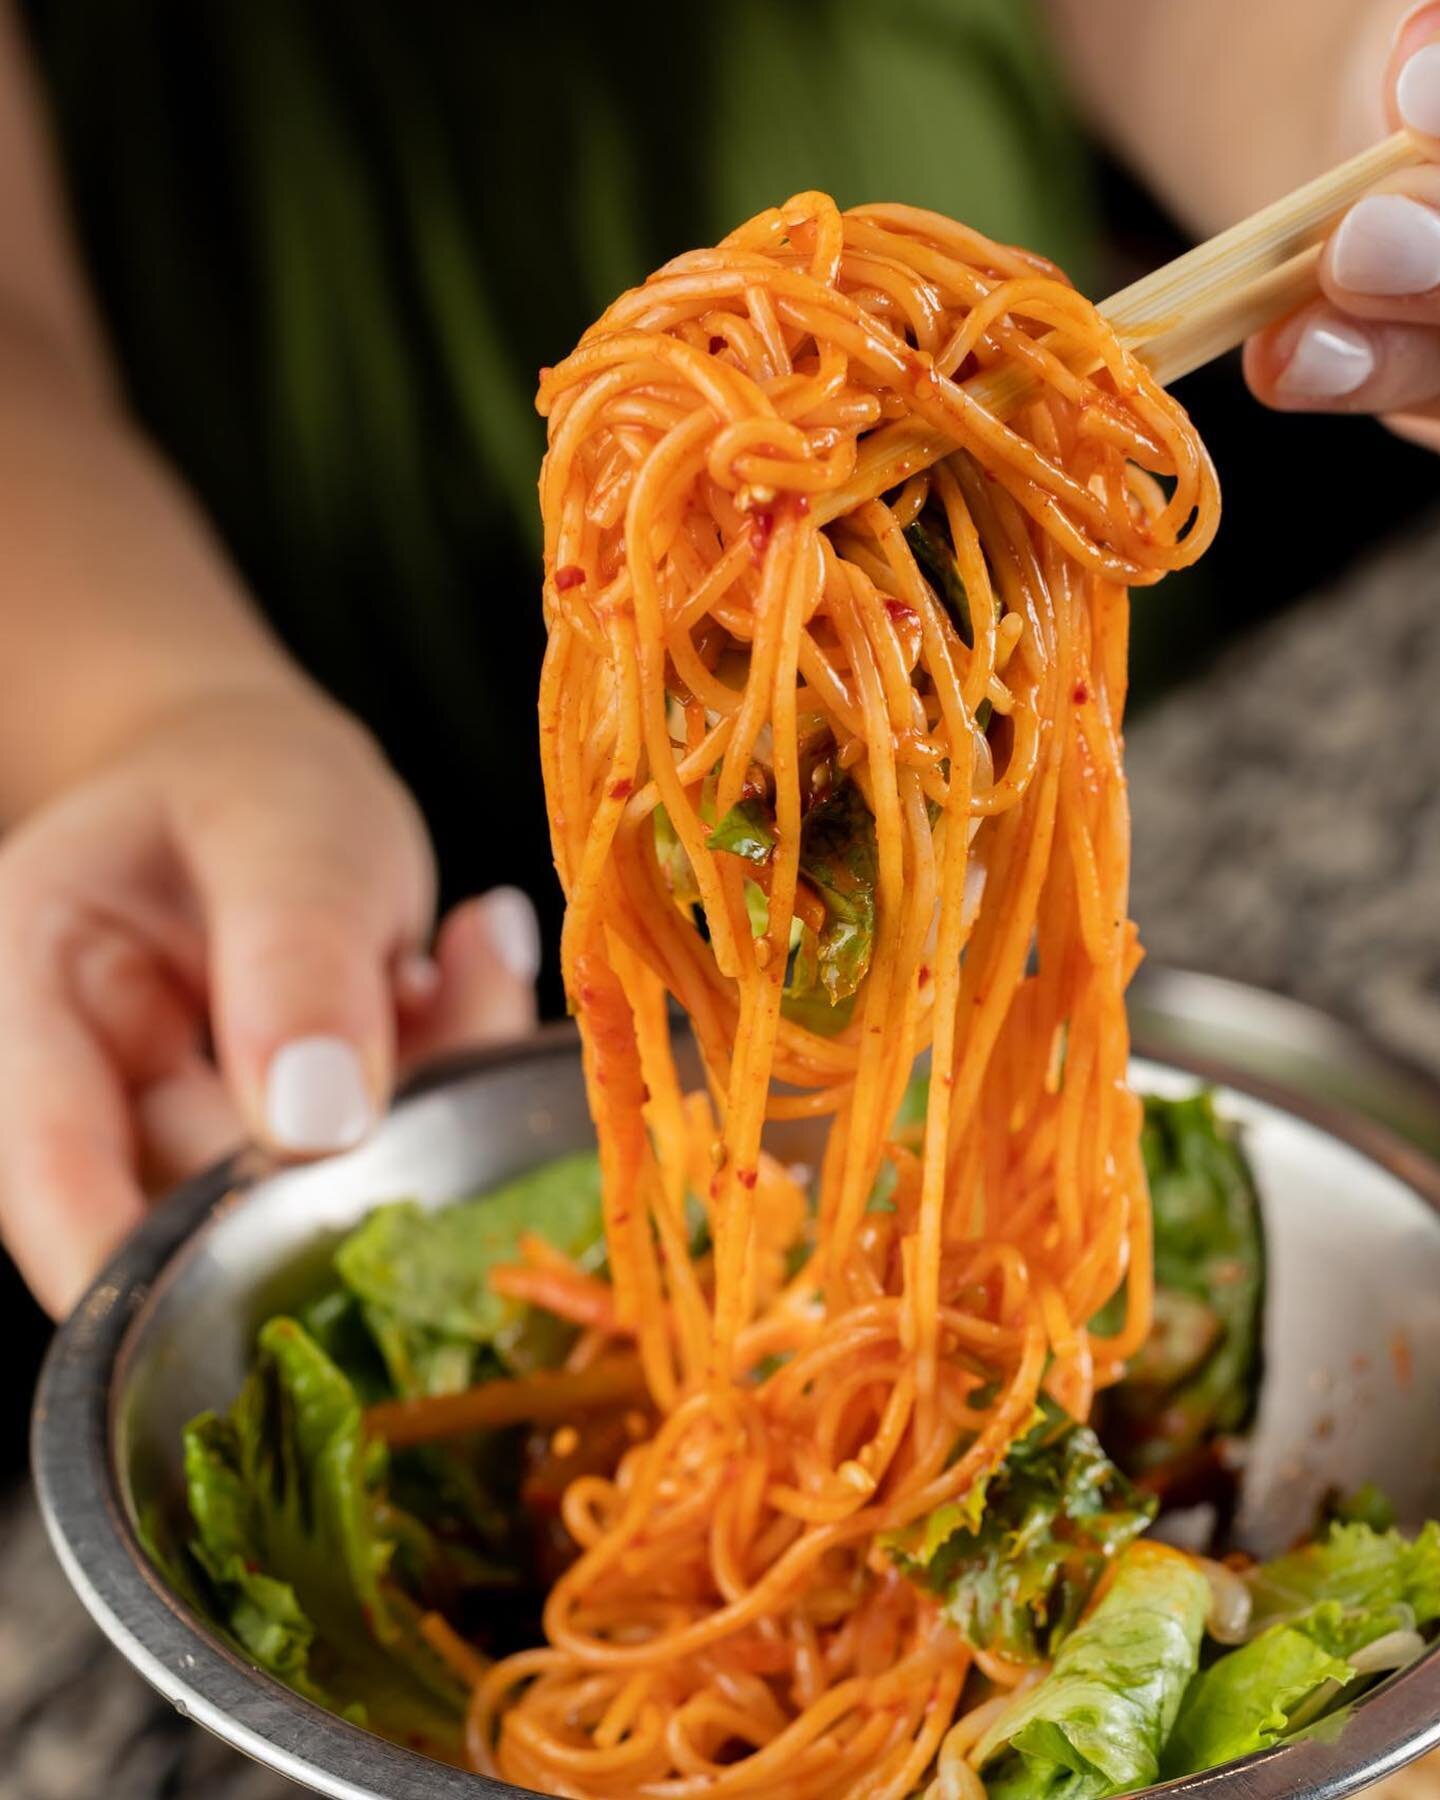 Can you handle the heat? 🔥😎 Our spicy cold noodles can cool you down or amp up the flavor. All at the same time. 
.
#spicycoldnoodles #noodles #koreanbbq #allyoucaneat #letsmeat #letsmeatkbbq #charlottenc #southendclt #clt #cltnc #clteats #cltfoodi